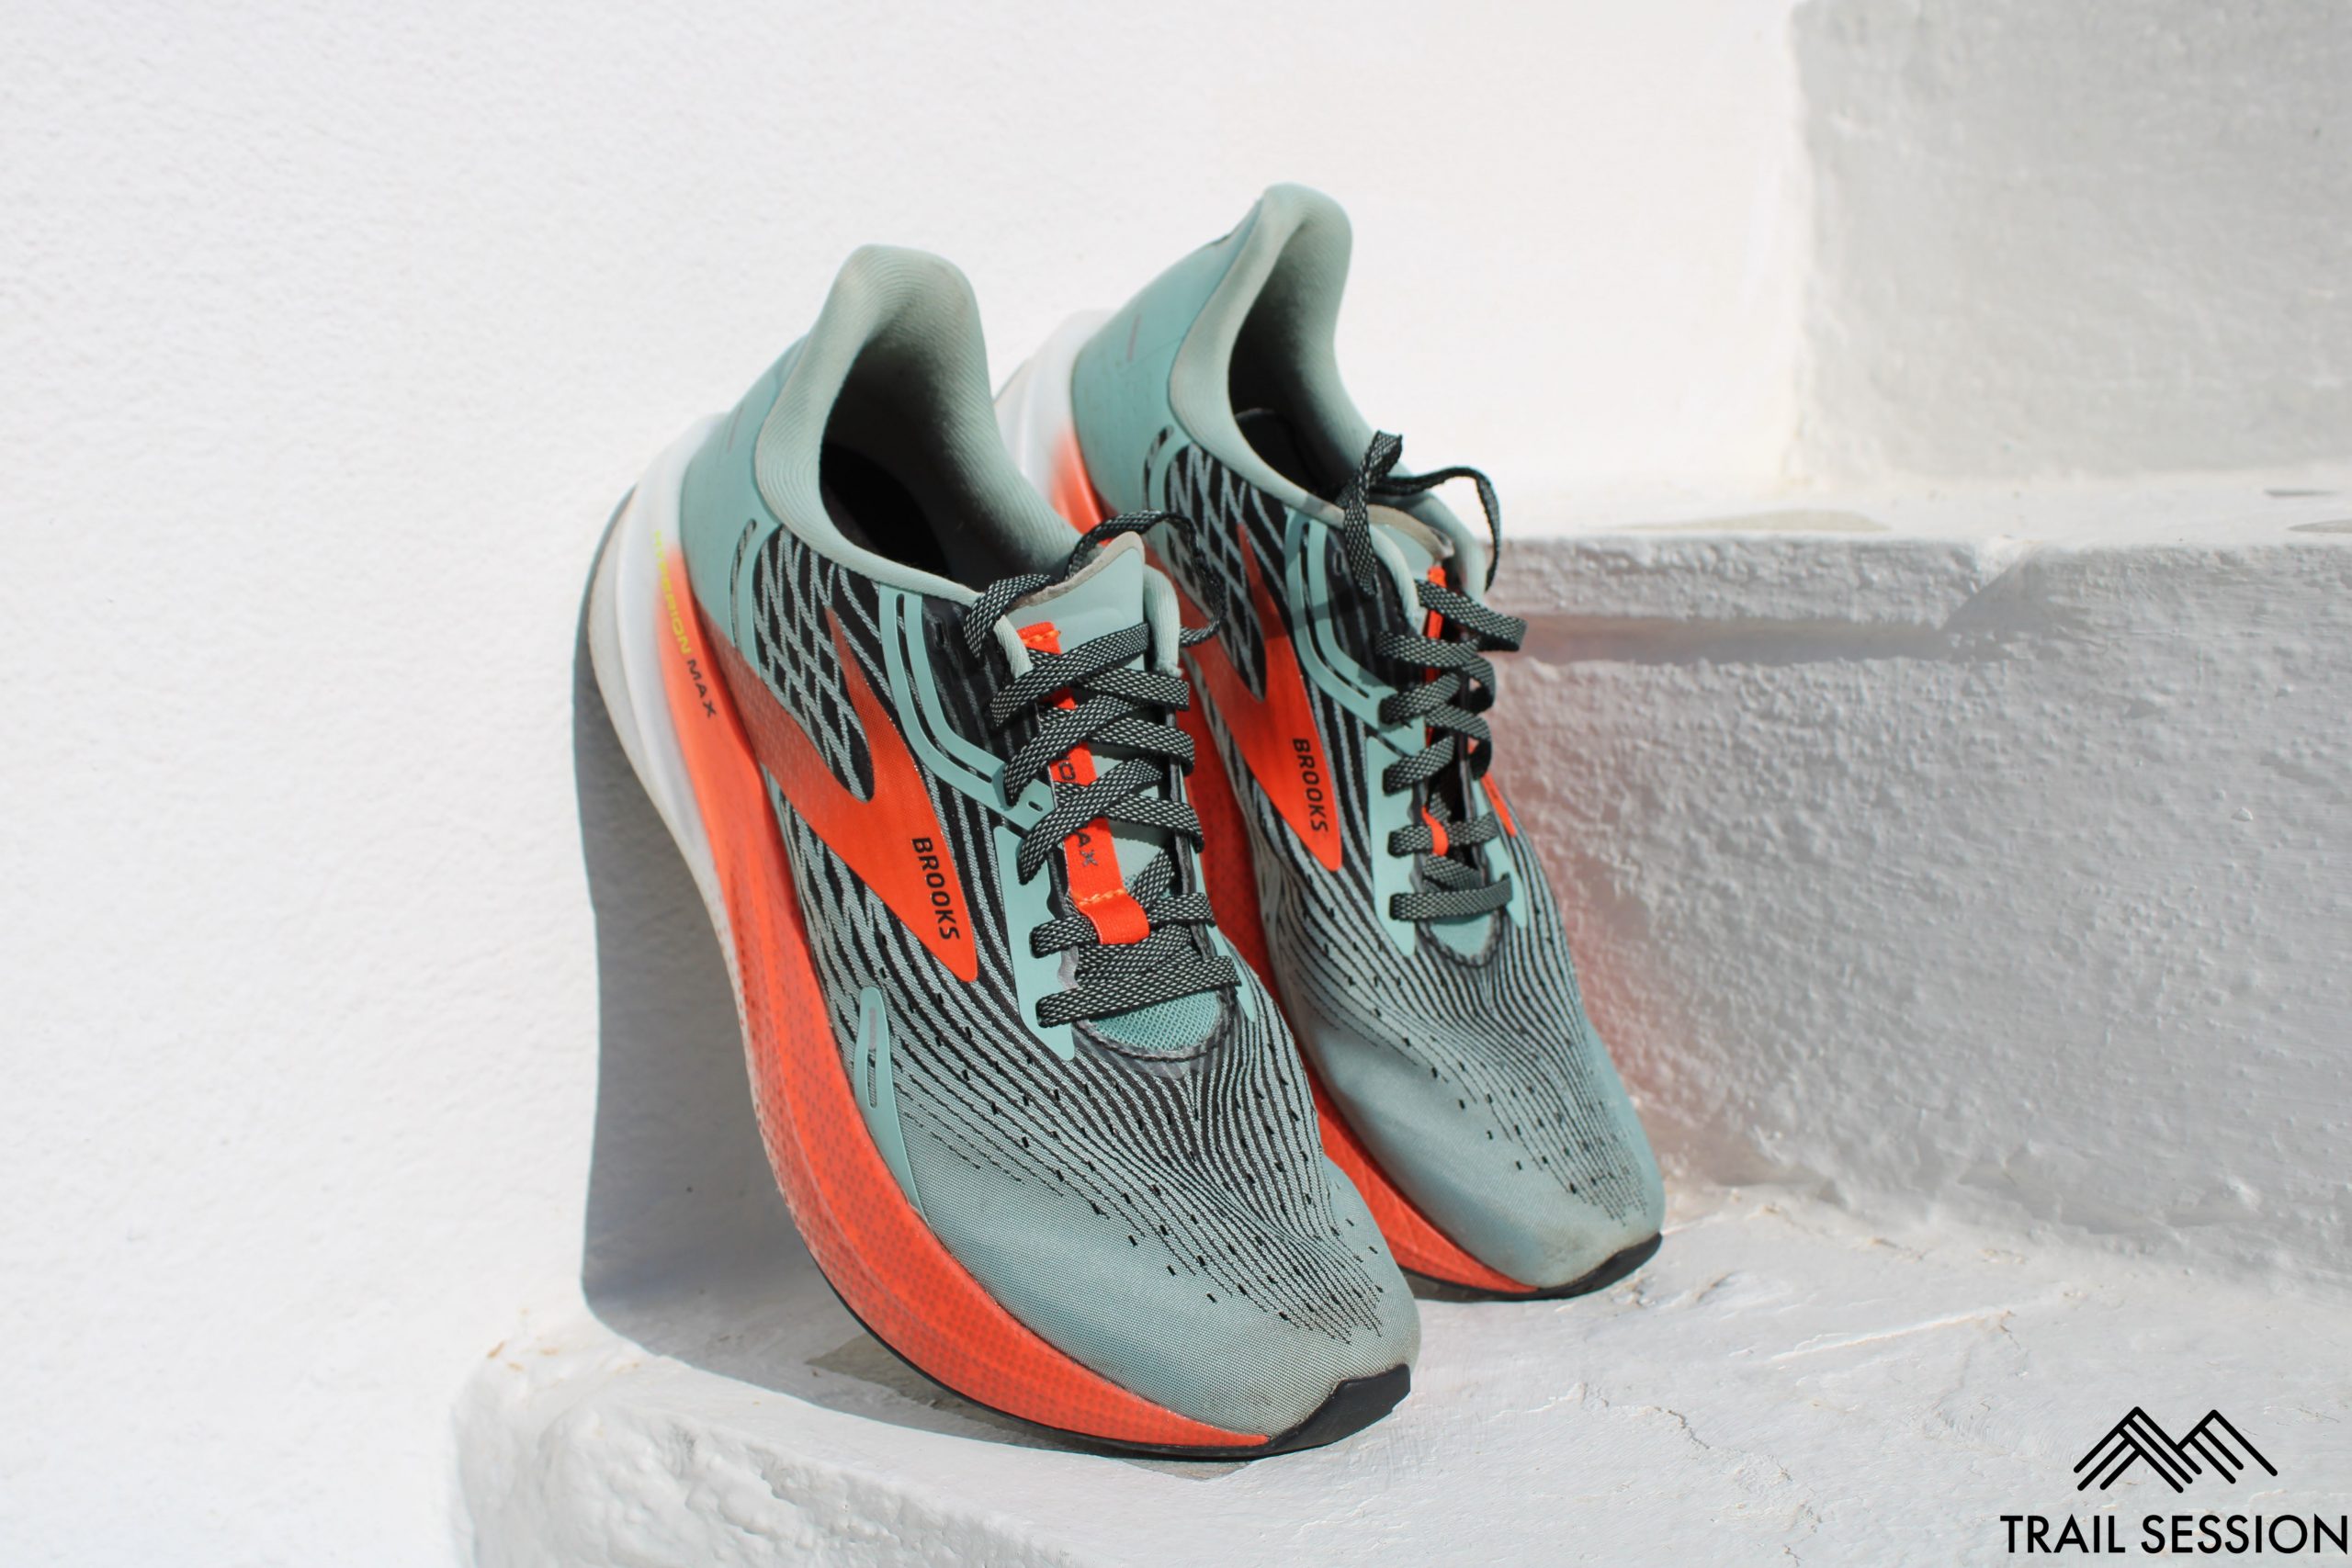 Brooks Hyperion Max 